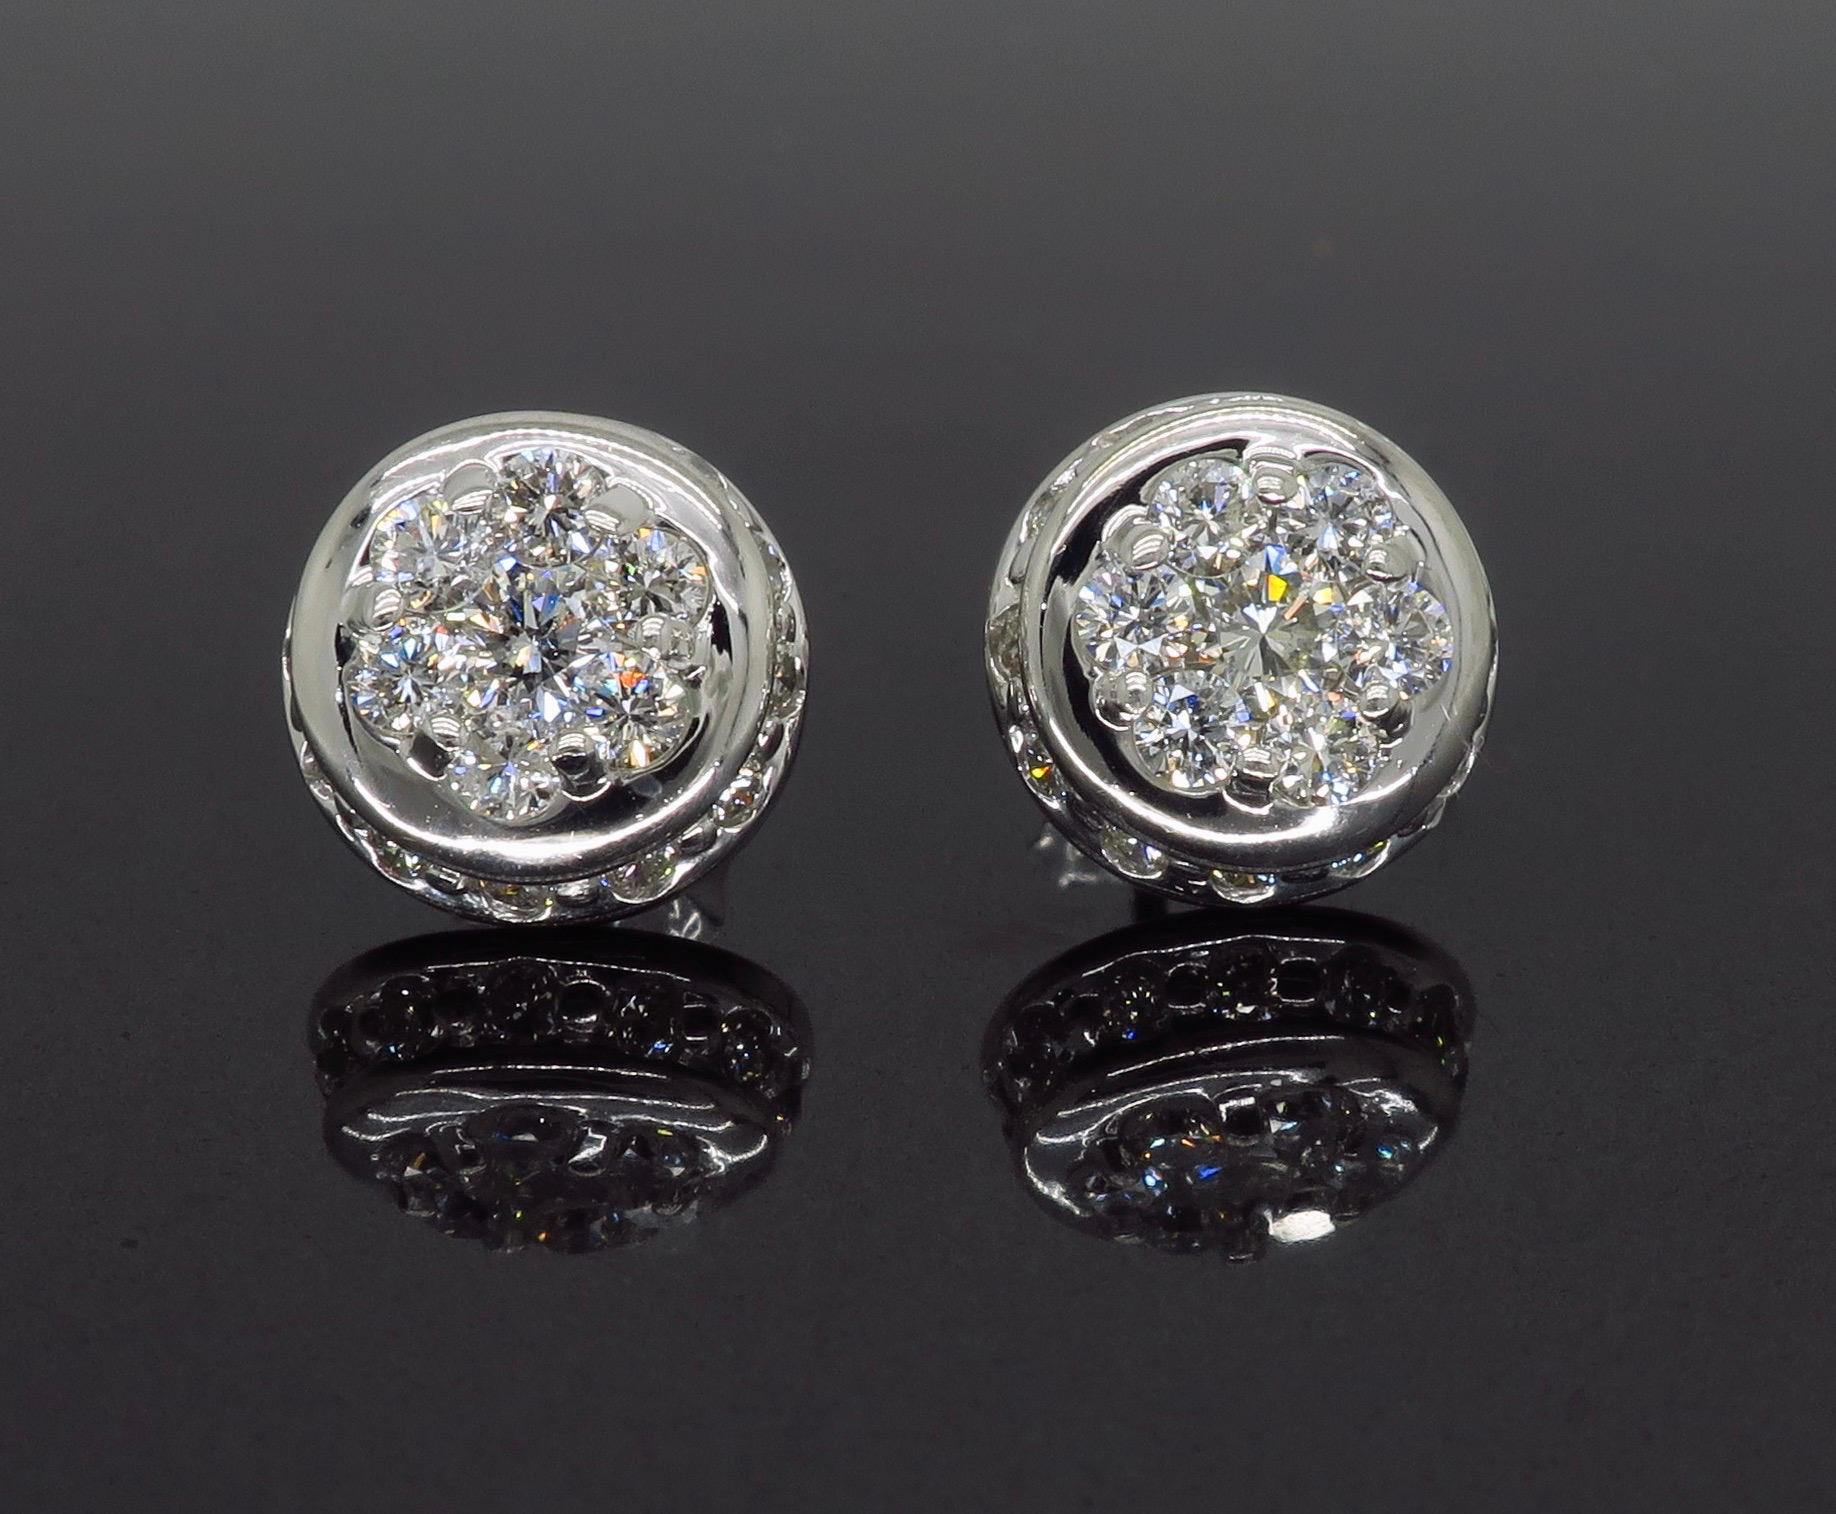 Unique cluster diamond earrings crafted in 14k white gold.

Diamond Carat Weight: .75CTW
Diamond Cut: Round Brilliant Cut Diamonds
Color: Average G-H
Clarity: Average VS
Metal: 14K White Gold
Marked/Tested: Stamped “14K